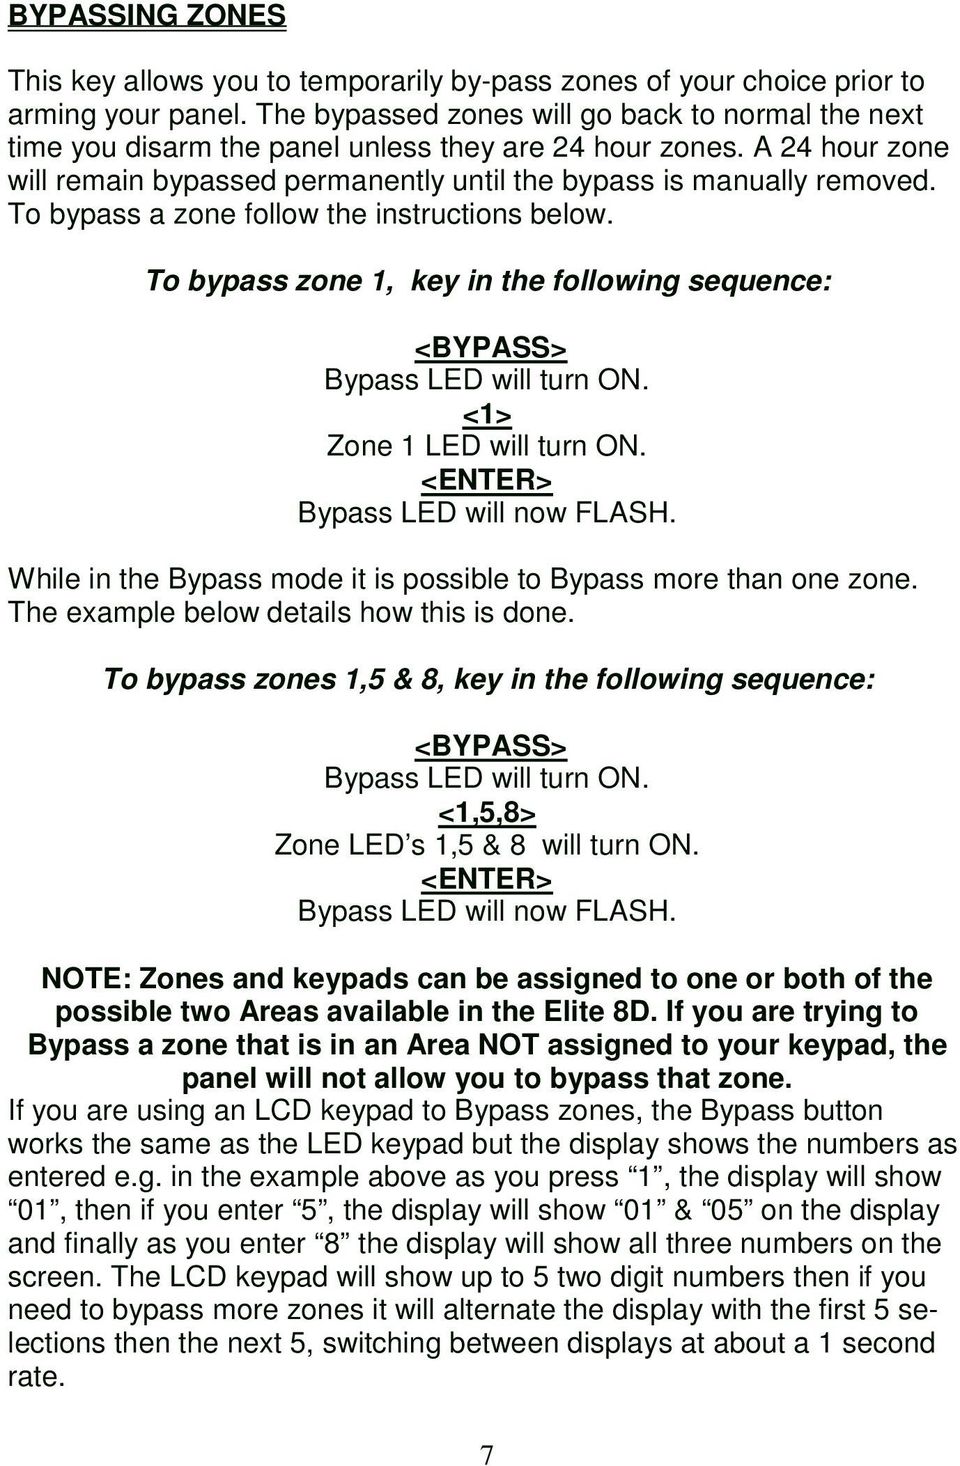 To bypass a zone follow the instructions below. To bypass zone 1, key in the following sequence: <BYPASS> Bypass LED will turn ON. <1> Zone 1 LED will turn ON. <ENTER> Bypass LED will now FLASH.